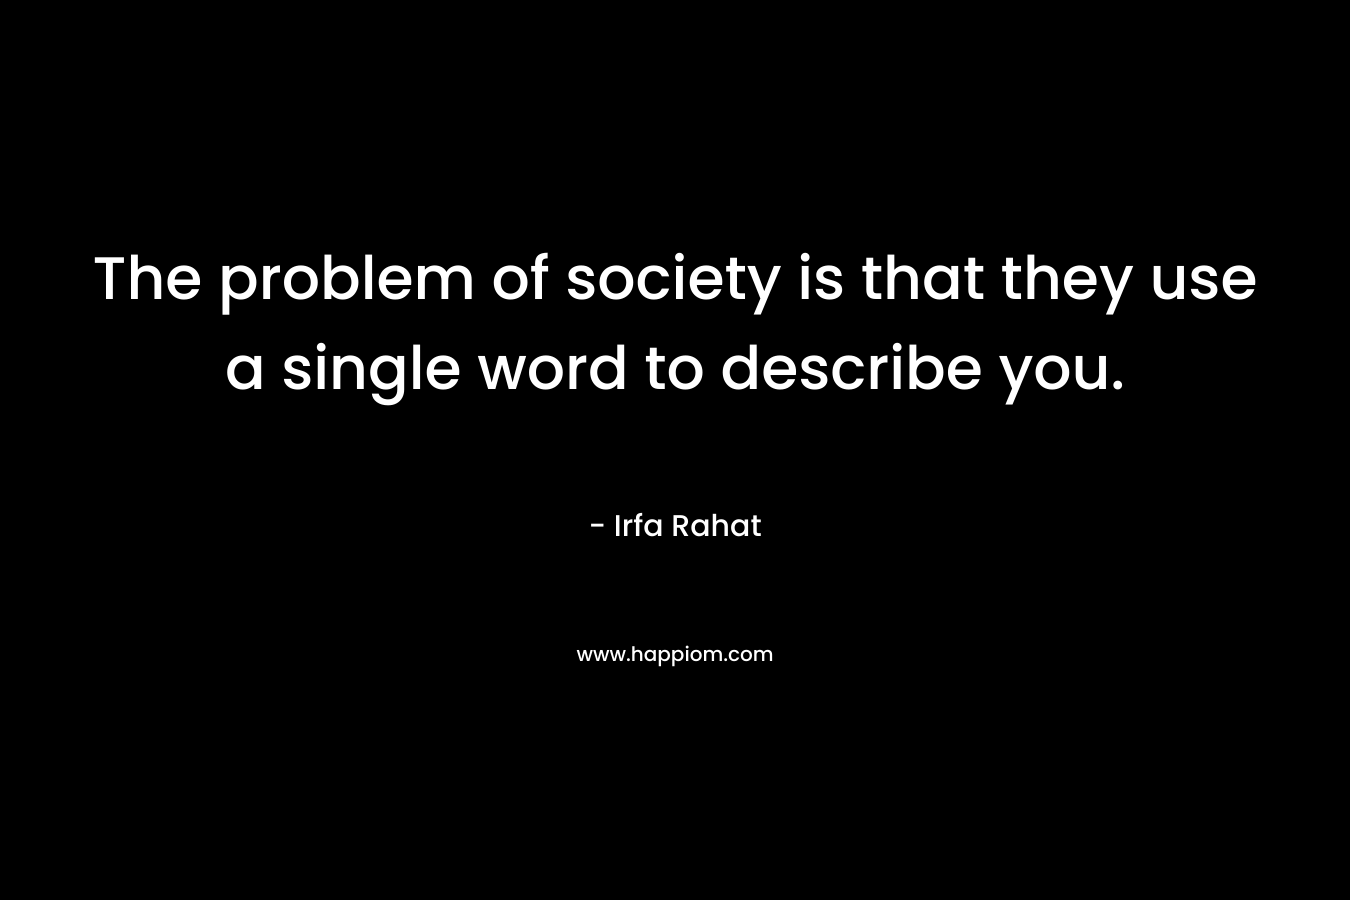 The problem of society is that they use a single word to describe you.